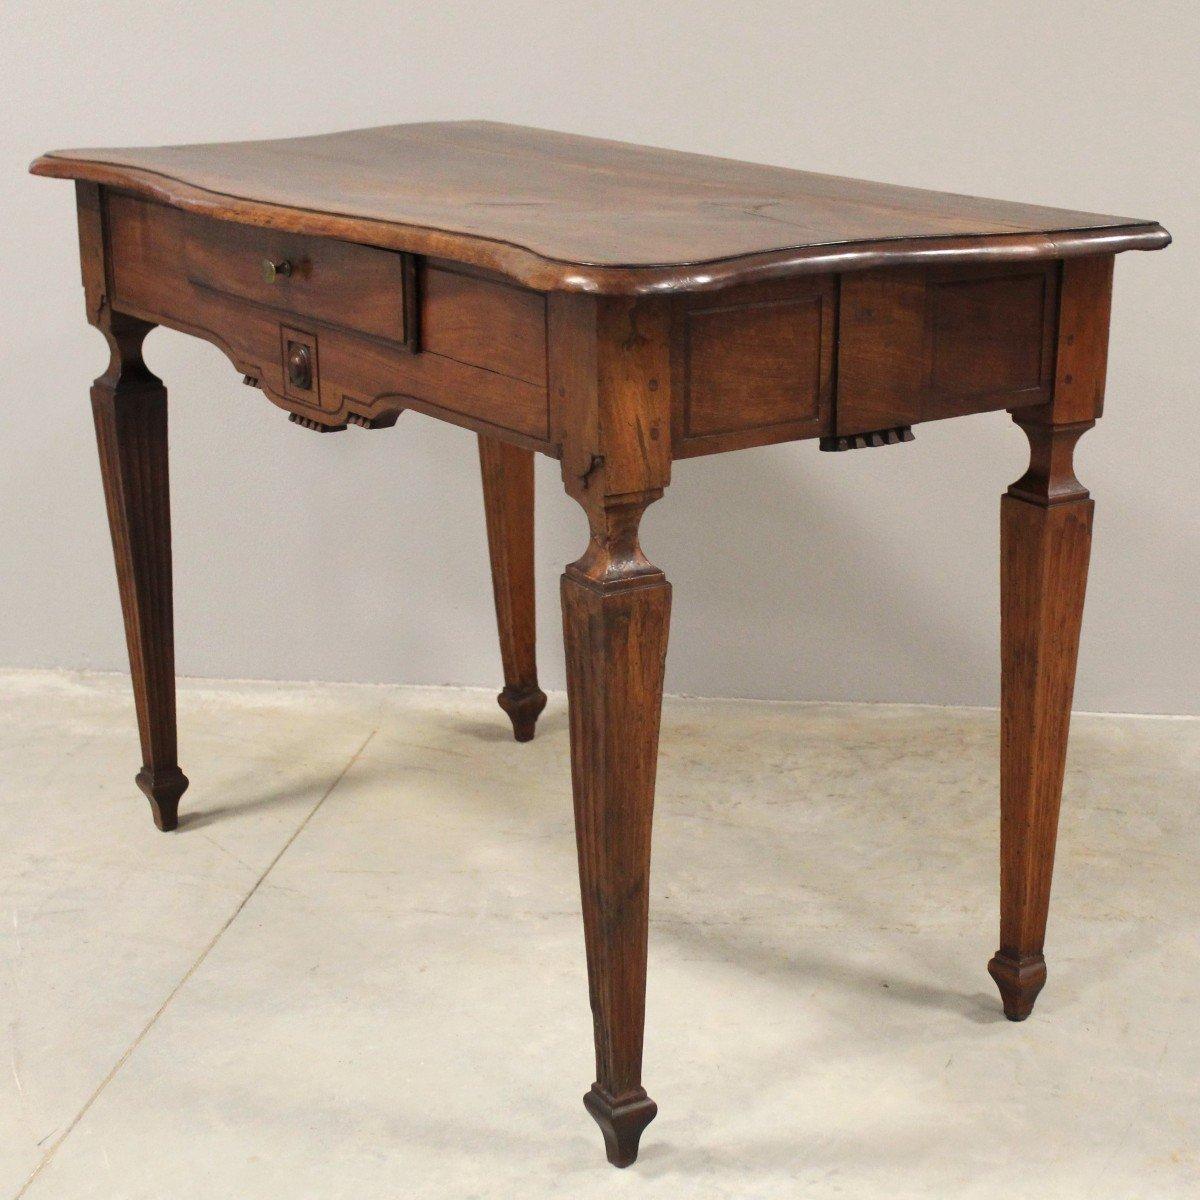 18th Century and Earlier 18th Century Italian Walnut Console Table with Serpentine Top and Carved Apron